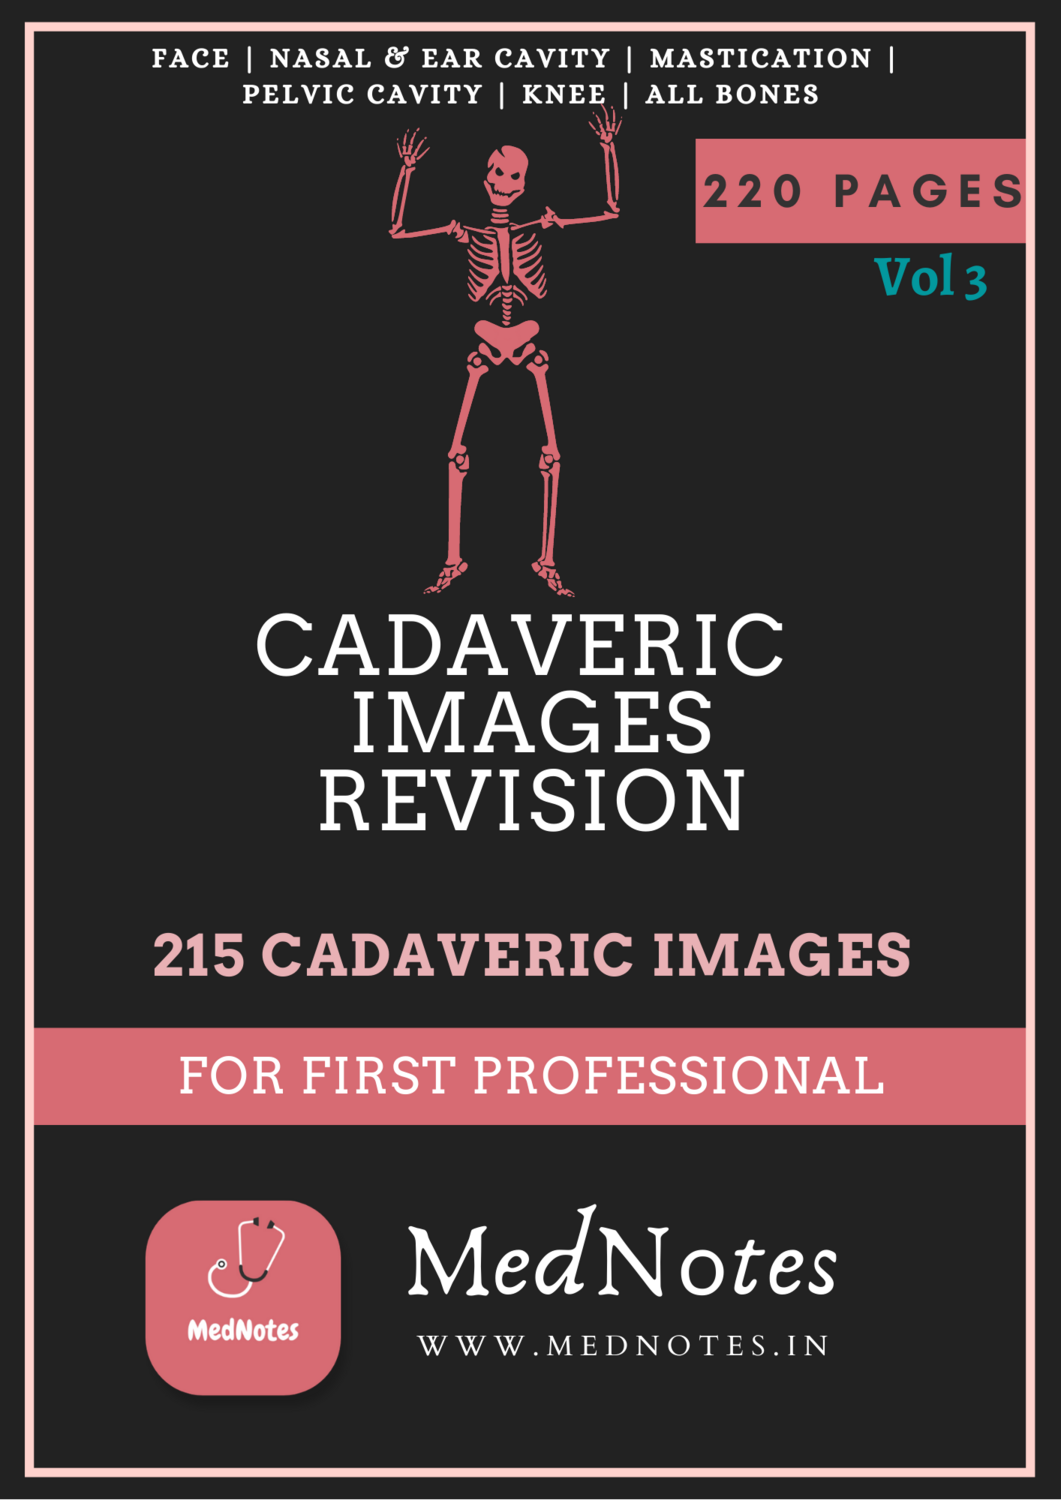 Cadaveric Images Revision (Vol 3) - For First Professional [E book]